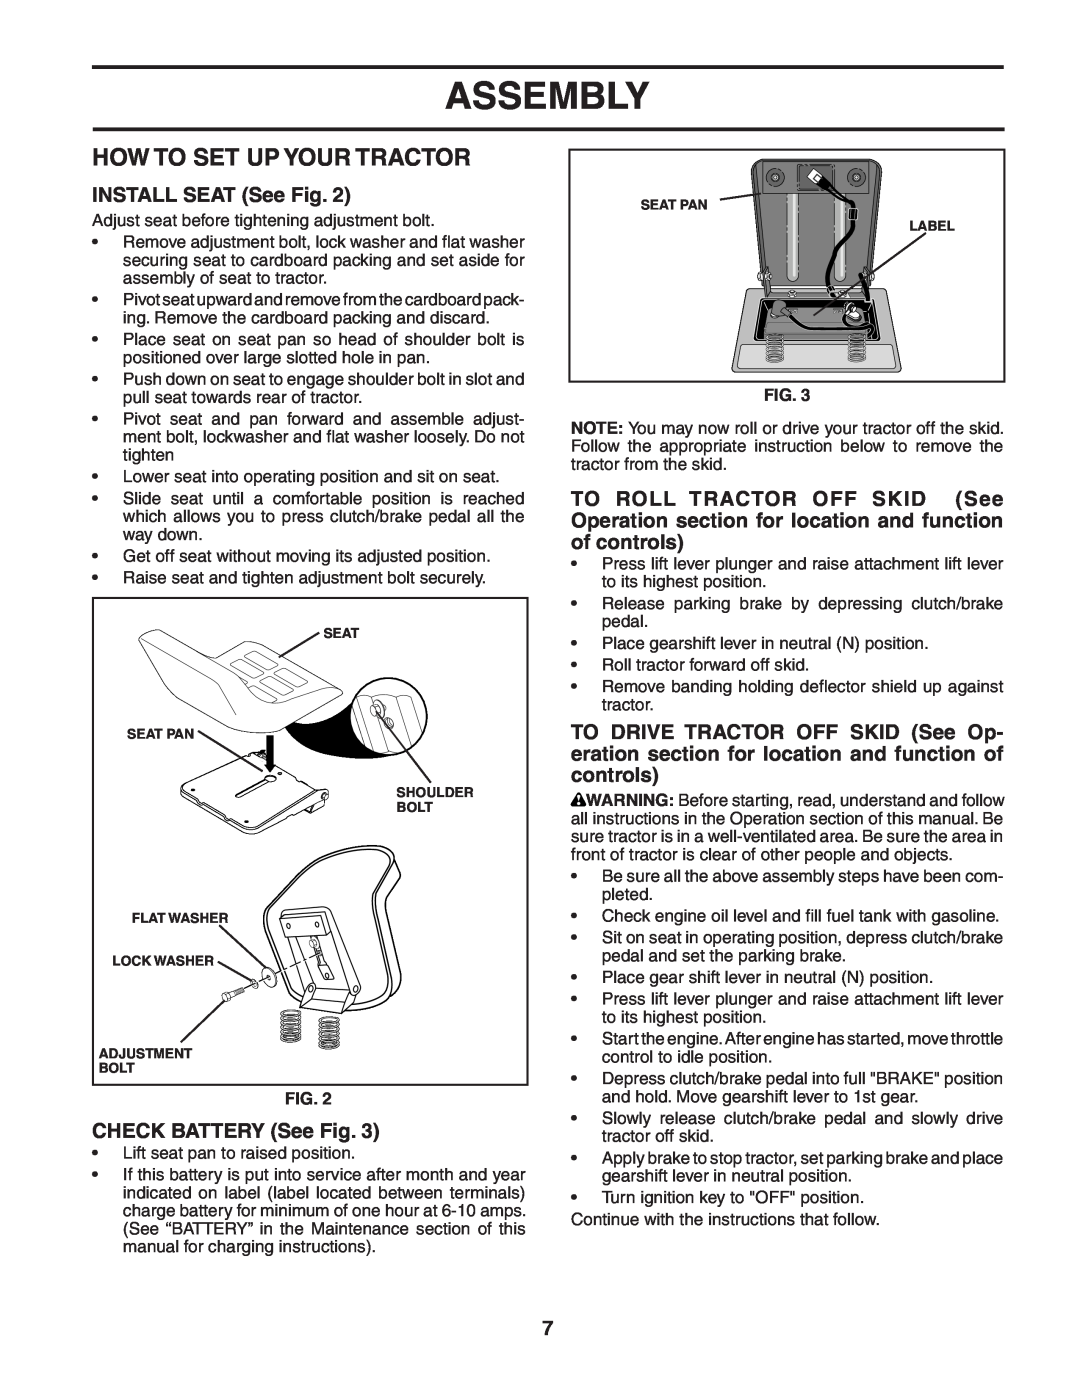 Poulan 183981 manual How To Set Up Your Tractor, INSTALL SEAT See Fig, CHECK BATTERY See Fig, Assembly 